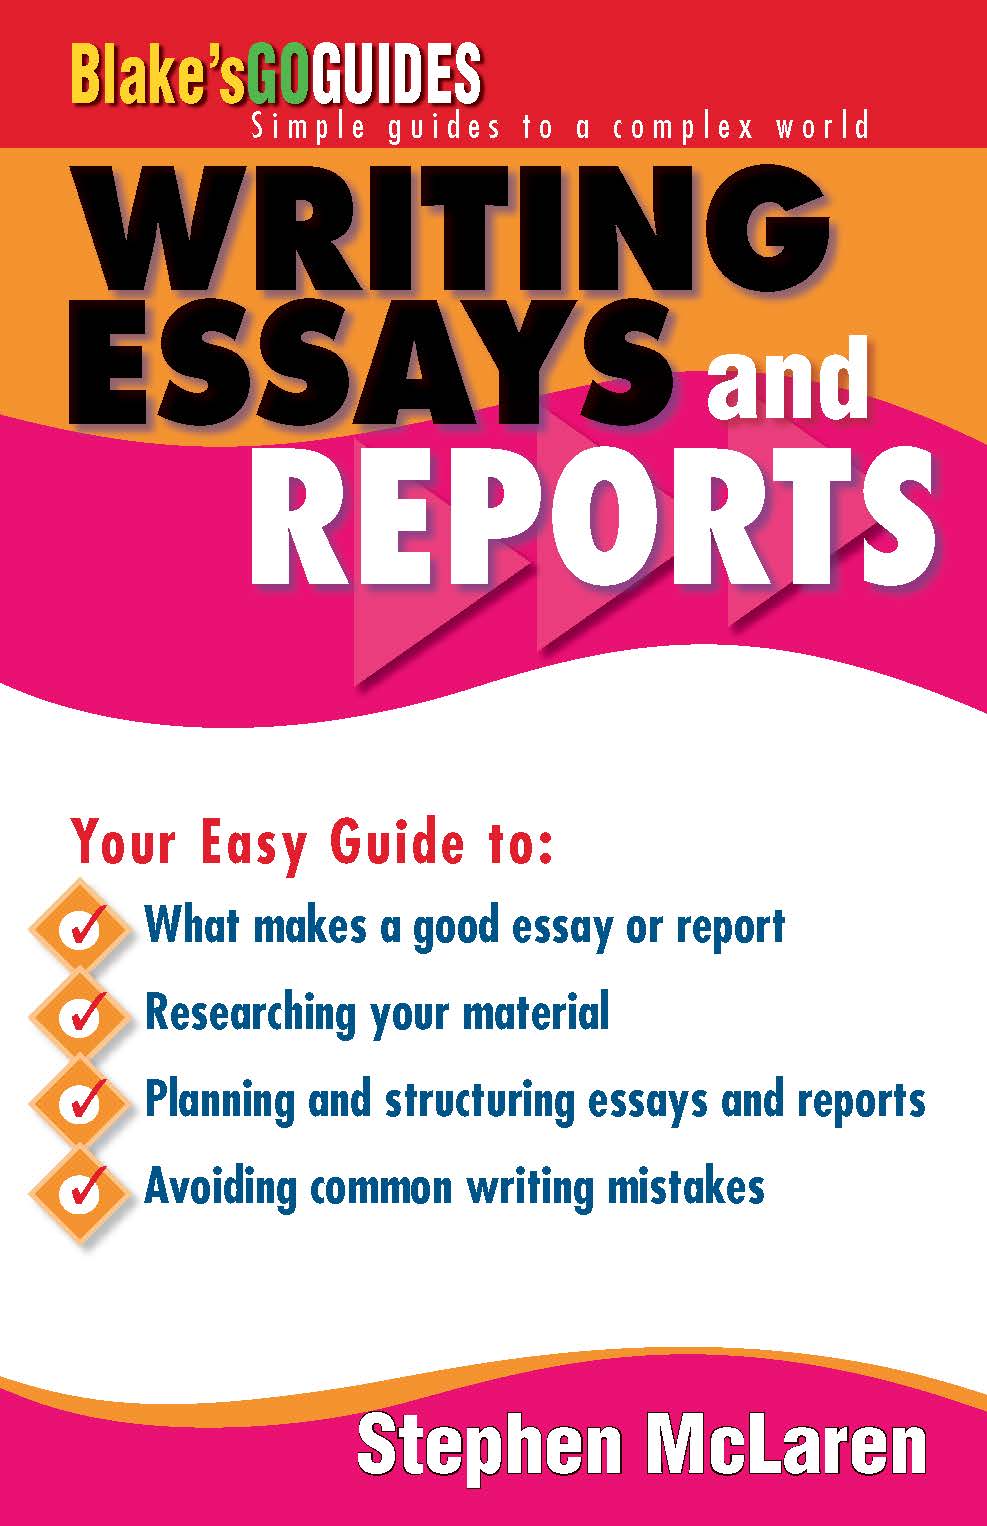 9781877085208-writing-essays-and-reports-fc.jpg